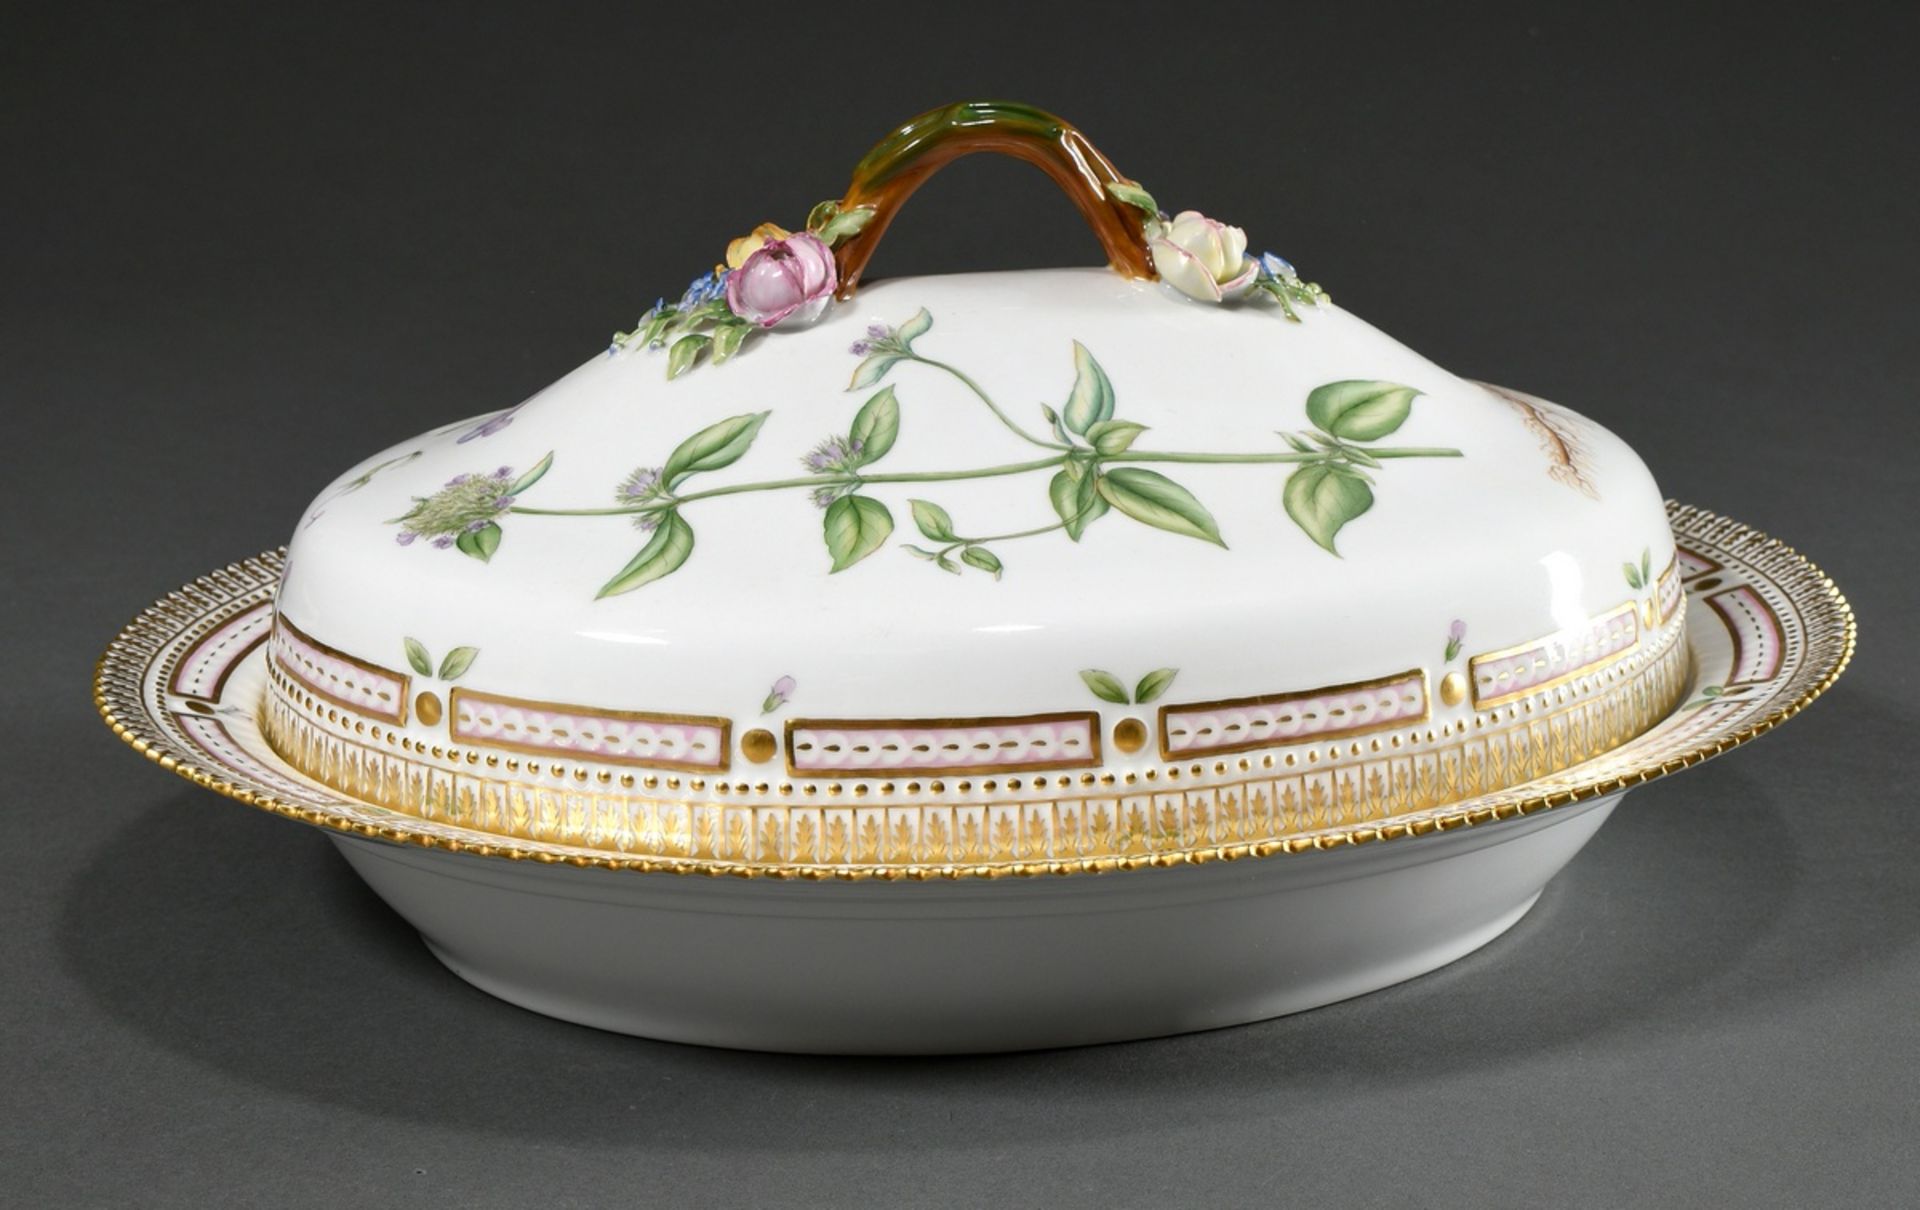 Large oval Royal Copenhagen "Flora Danica" tureen with polychrome painting, branch handles, applied - Image 2 of 7